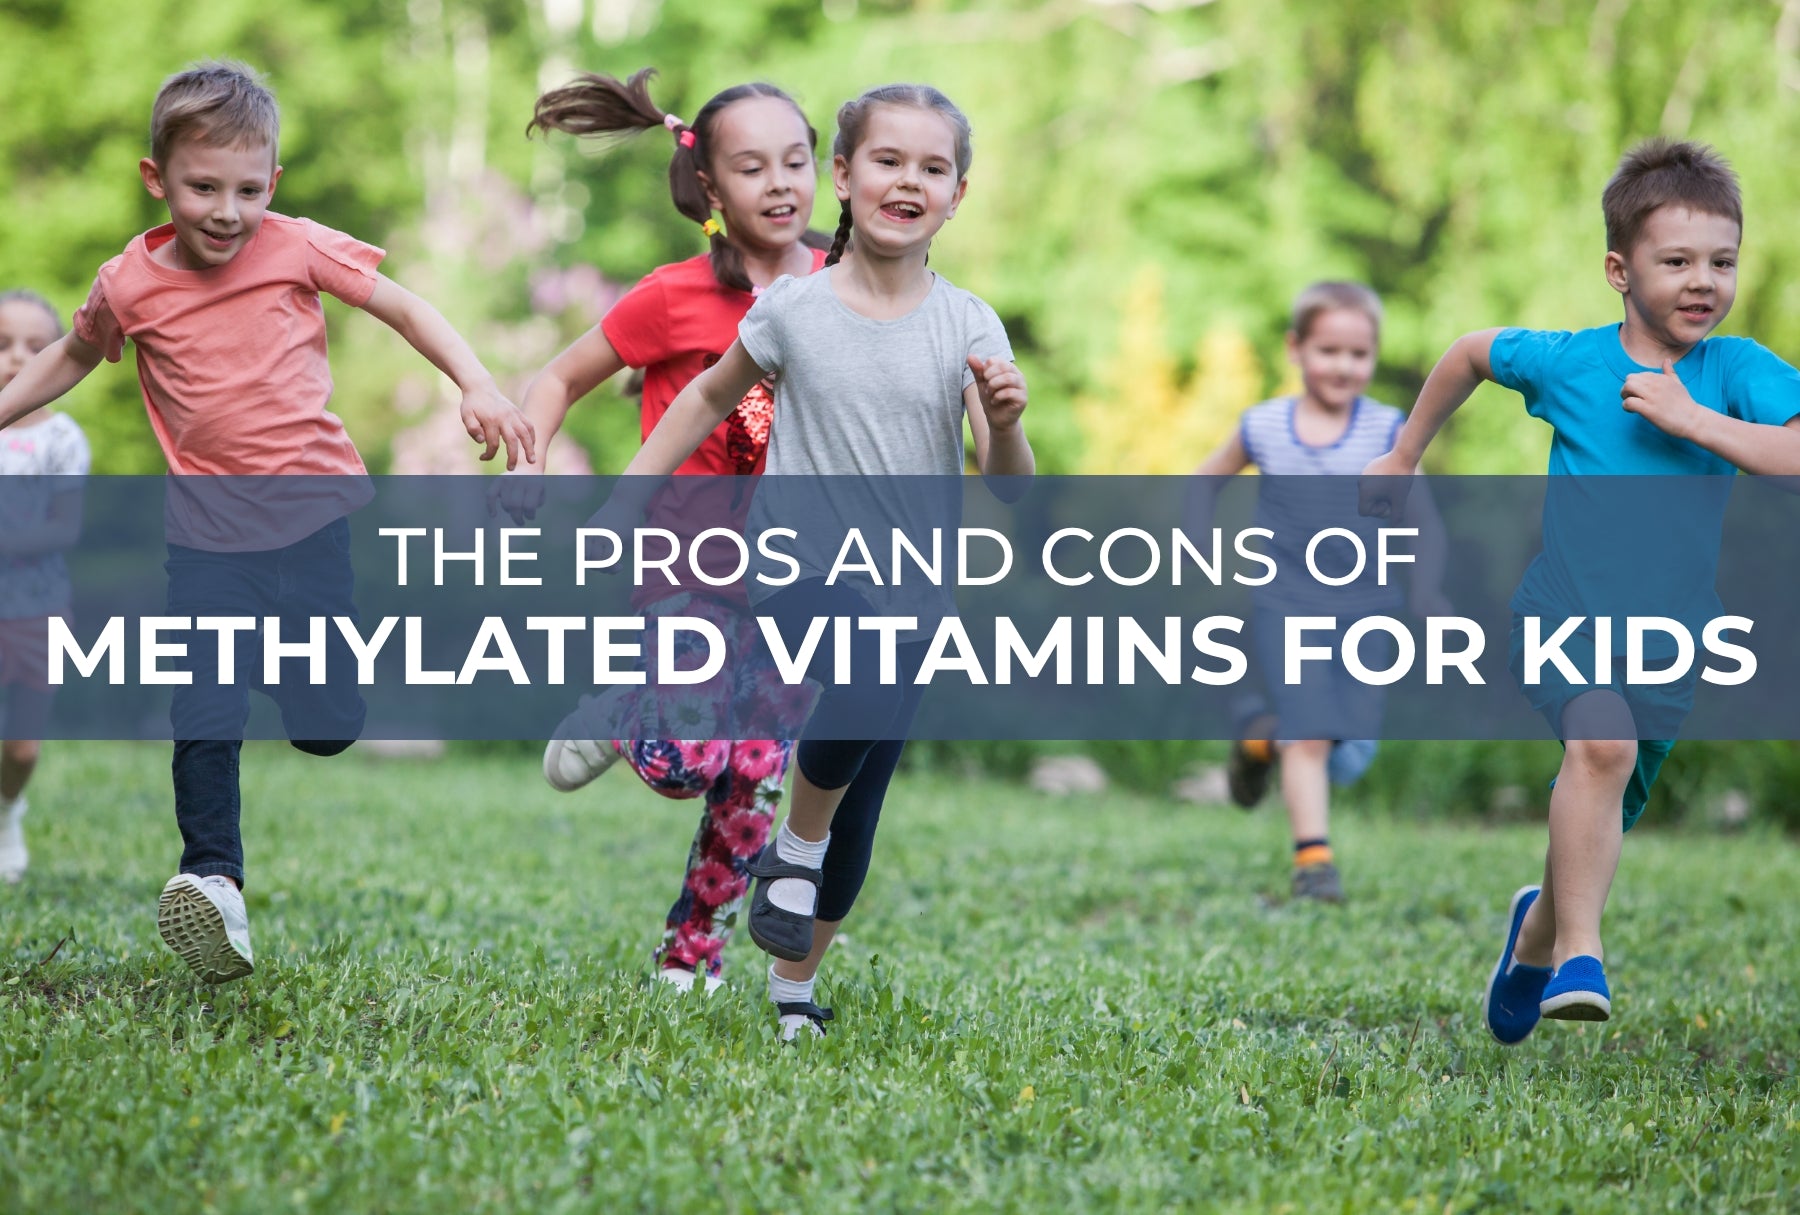 The Pros and Cons of Methylated Vitamins for Kids